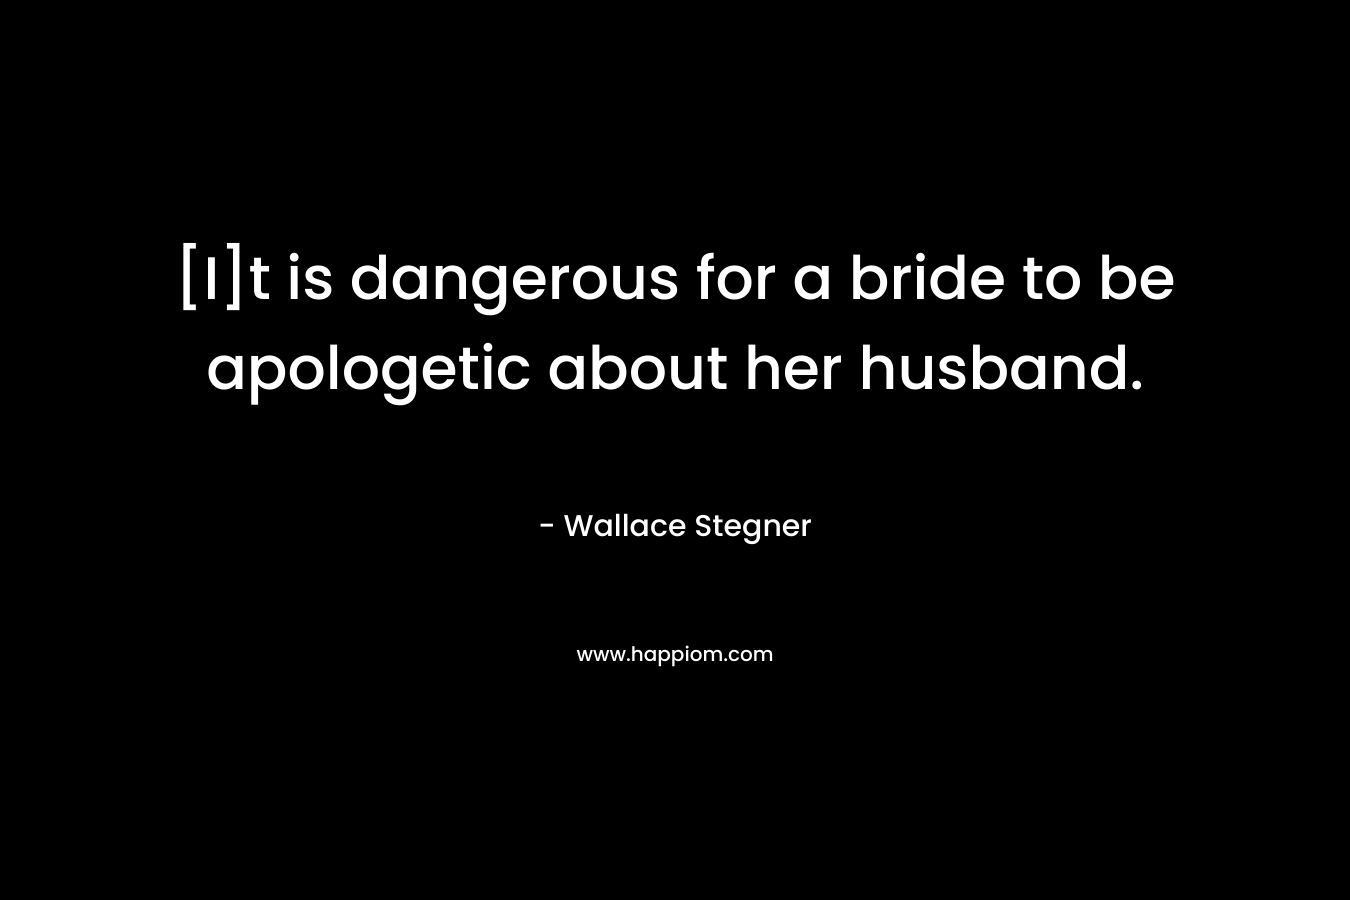 [I]t is dangerous for a bride to be apologetic about her husband. – Wallace Stegner